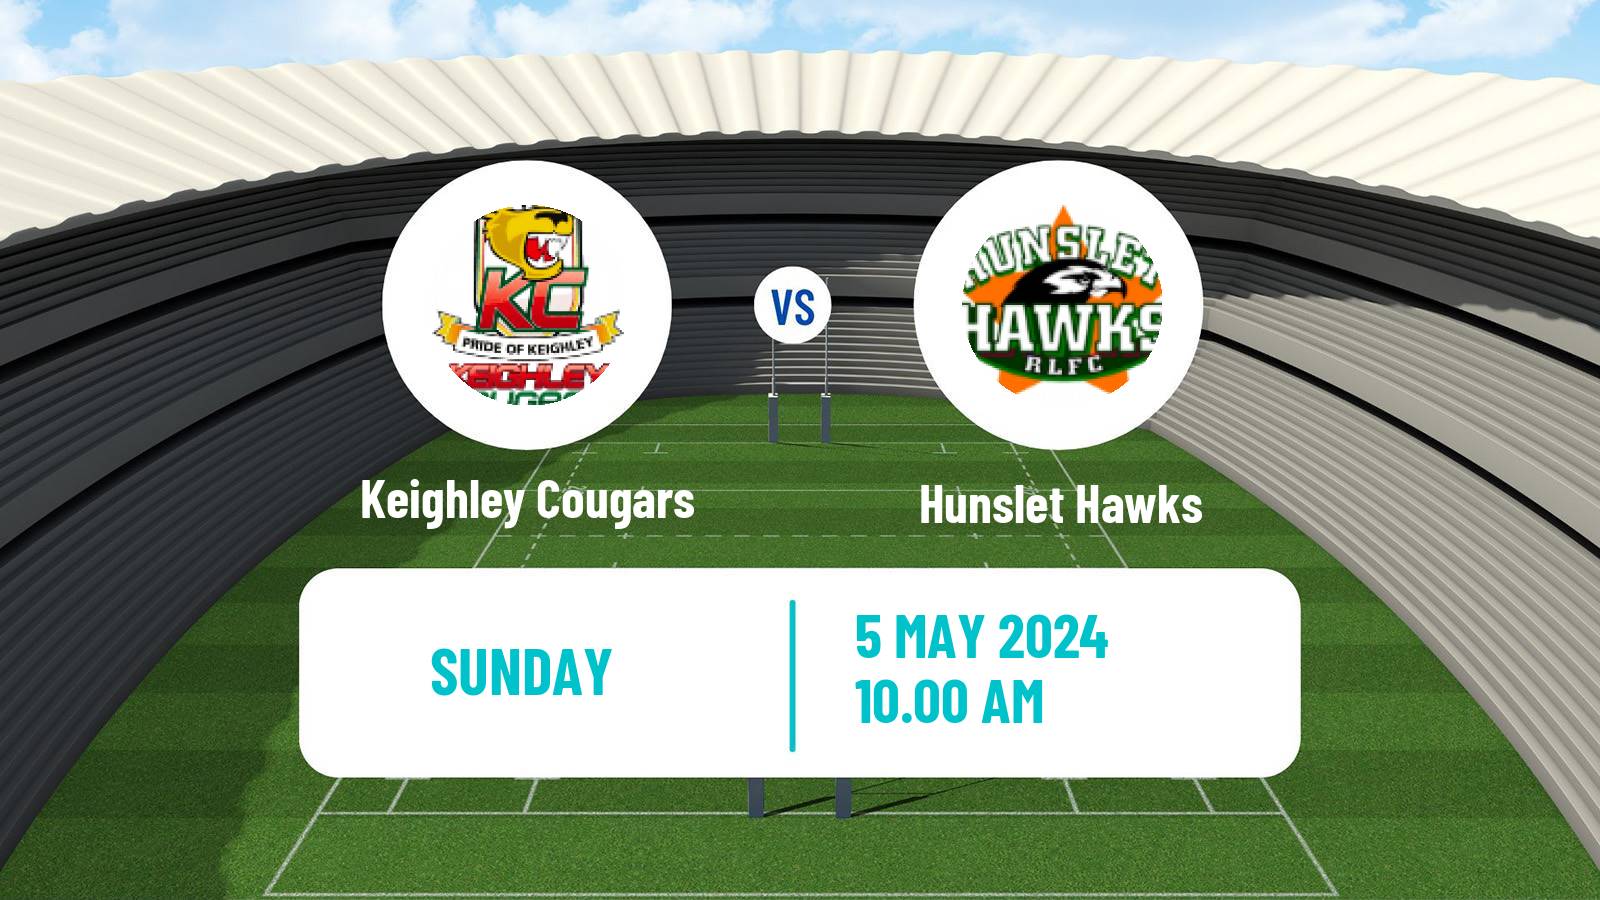 Rugby league English League 1 Rugby League Keighley Cougars - Hunslet Hawks